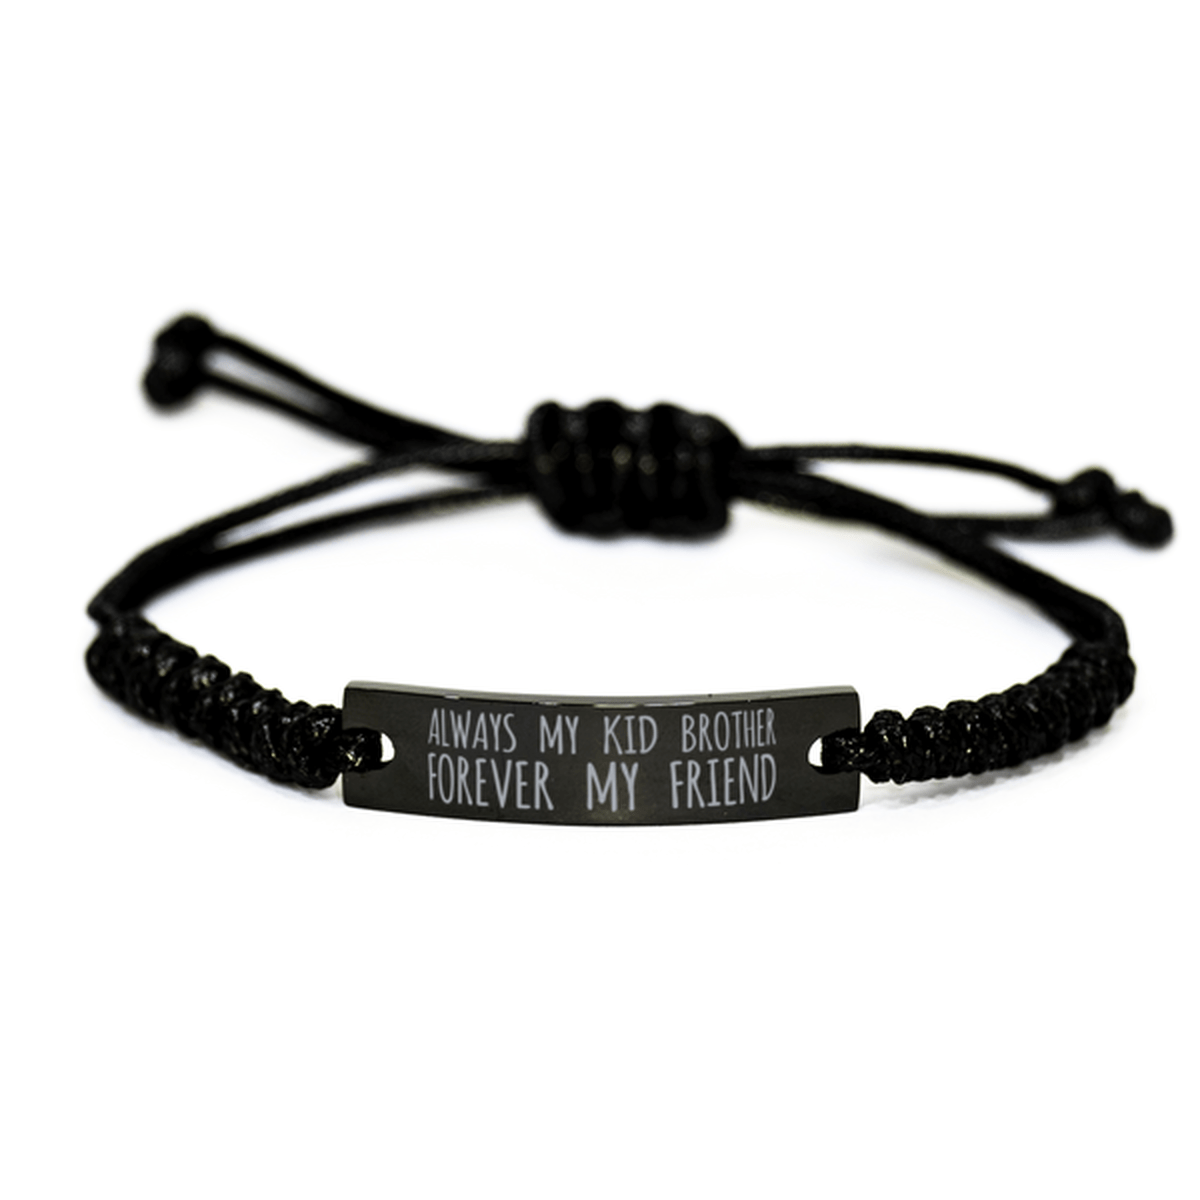 Inspirational Kid Brother Black Rope Bracelet, Always My Kid Brother Forever My Friend, Best Birthday Gifts For Family